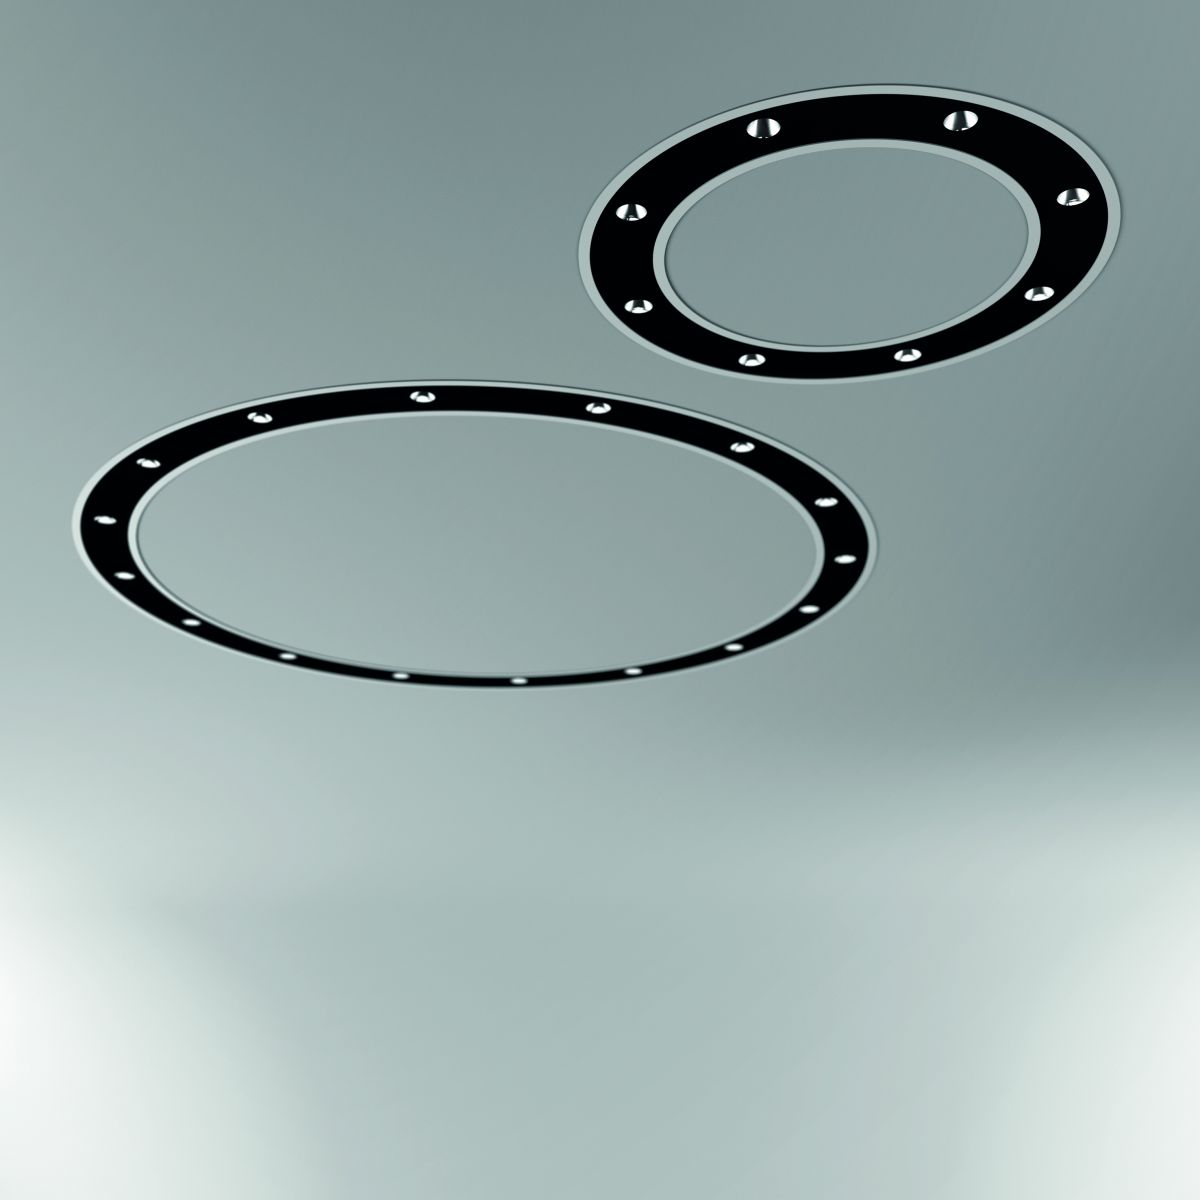 blore cup ring luminaire recessed 700mm 4000k 2851lm 8x3w dali